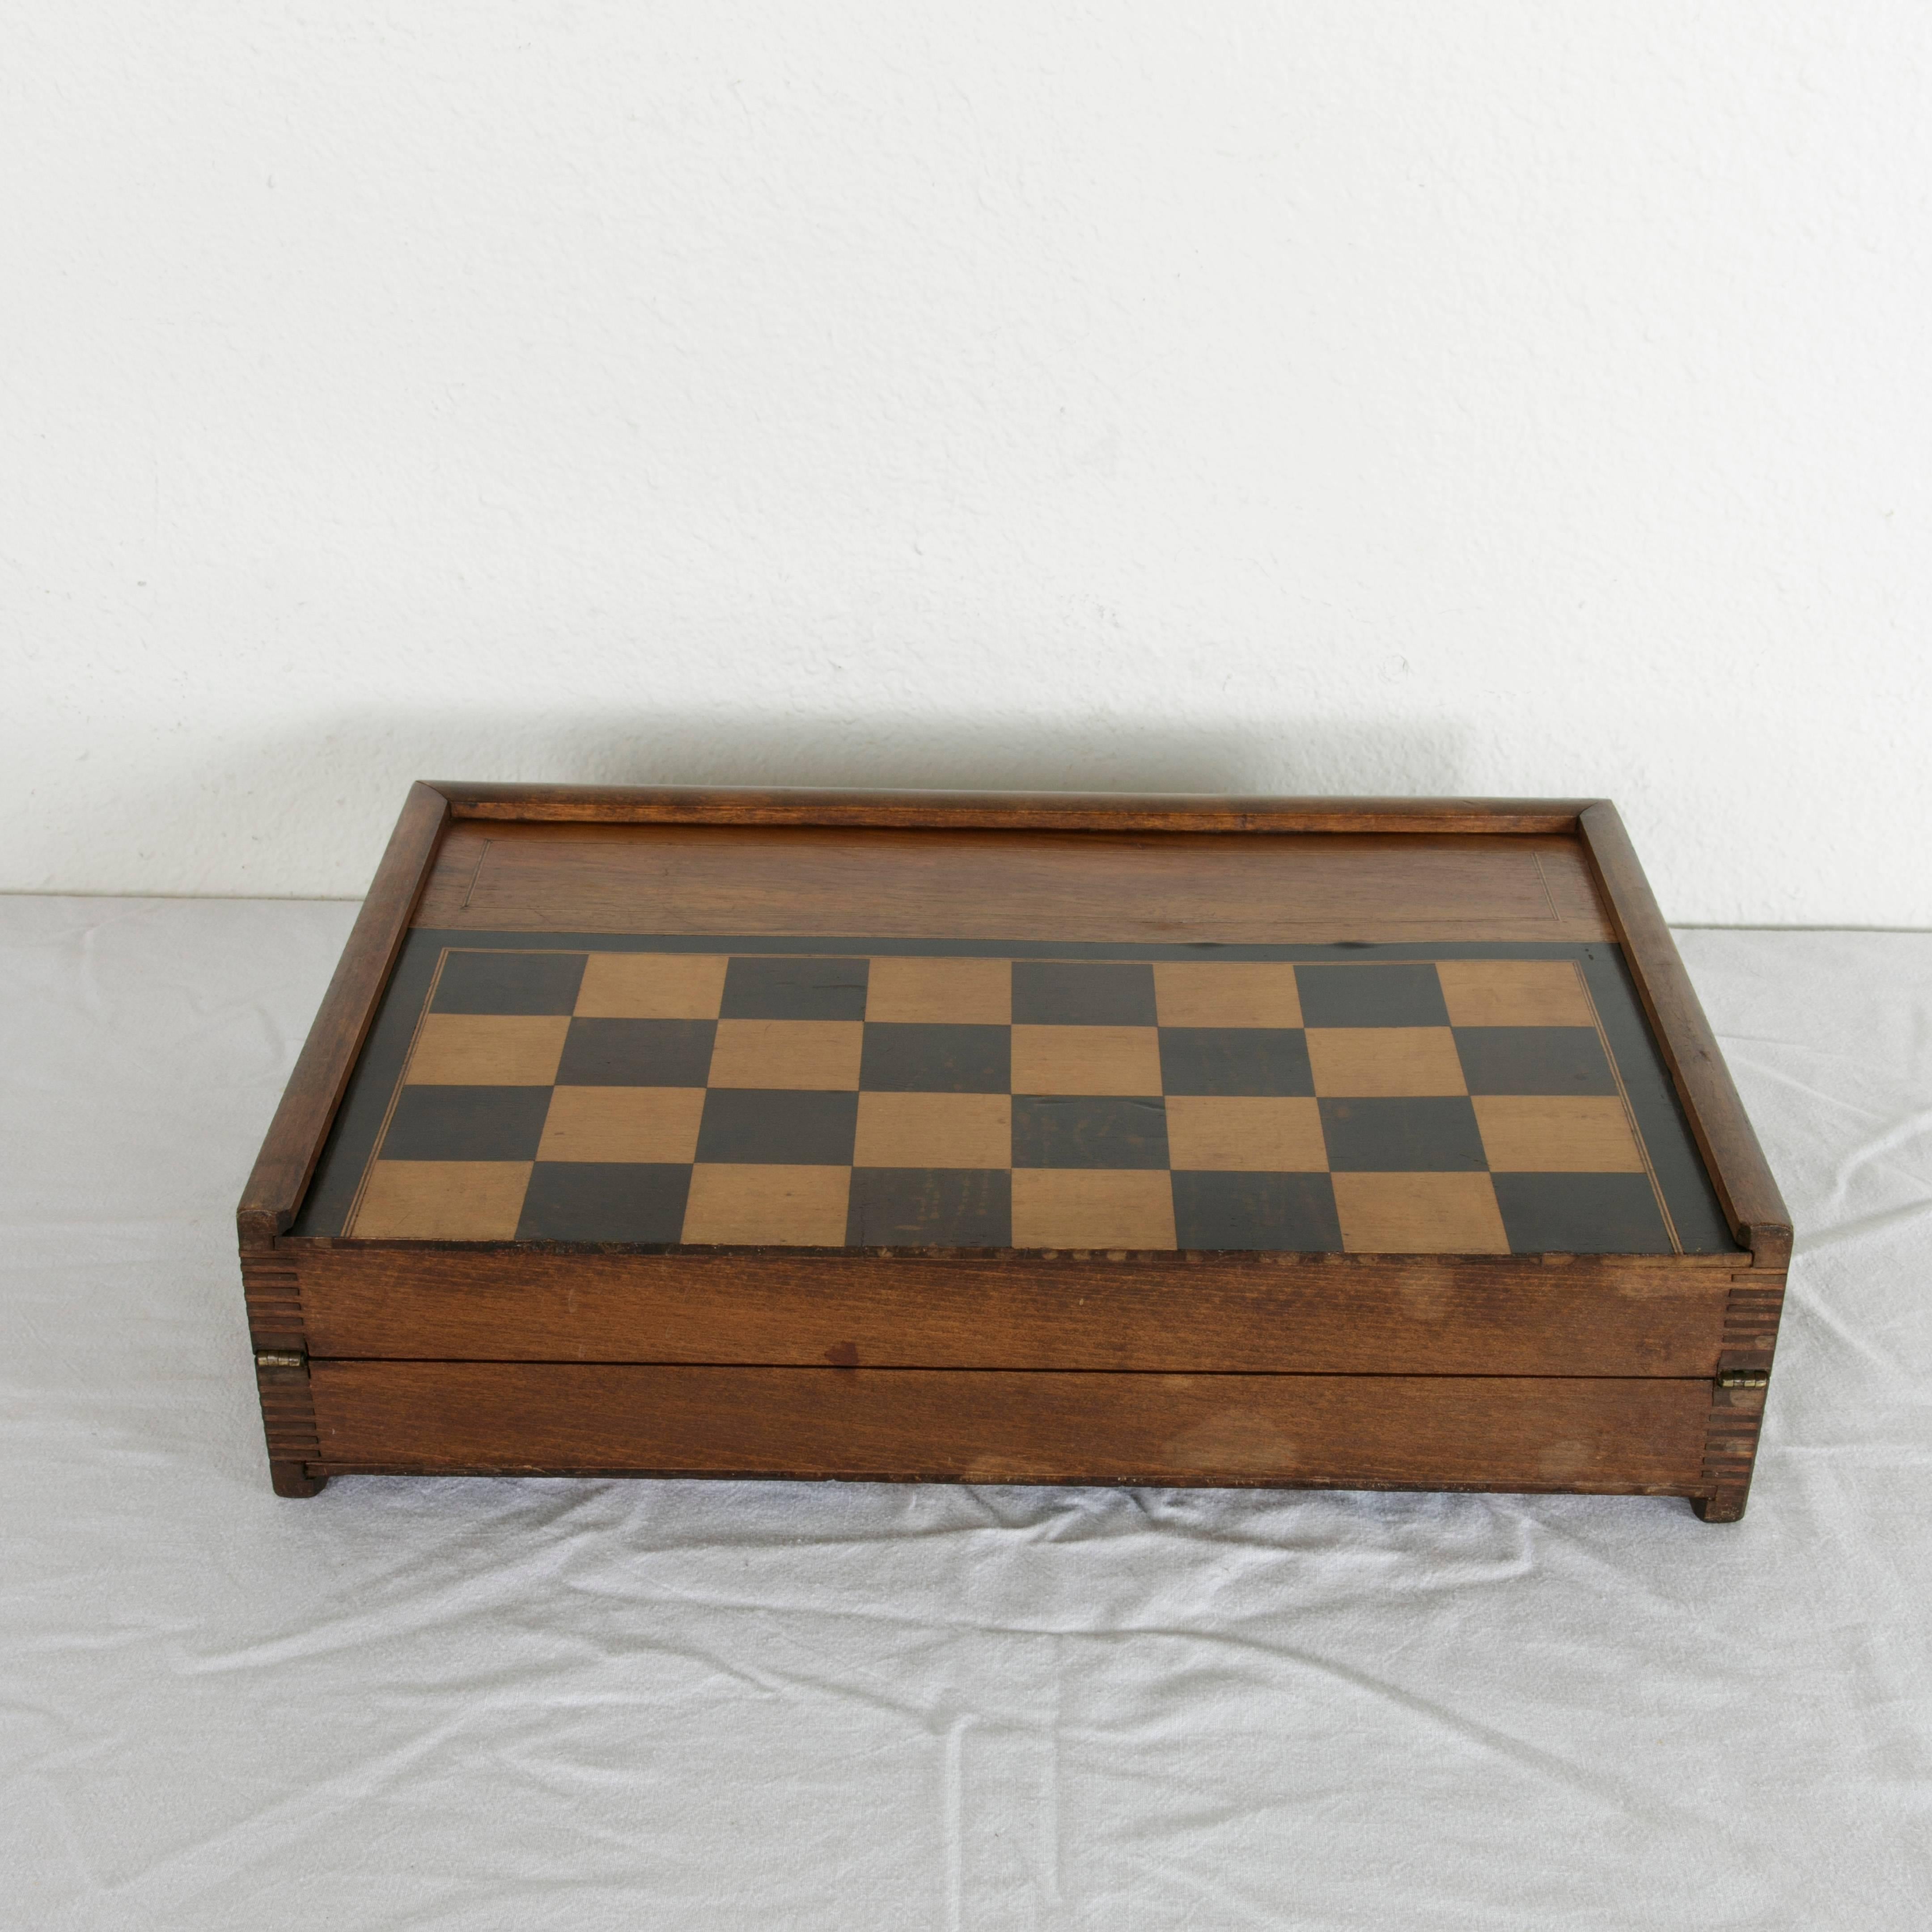 Early 20th Century Artisan-Made Parquetry Game Box or Board, Chess Checkers Backgammon, circa 1900